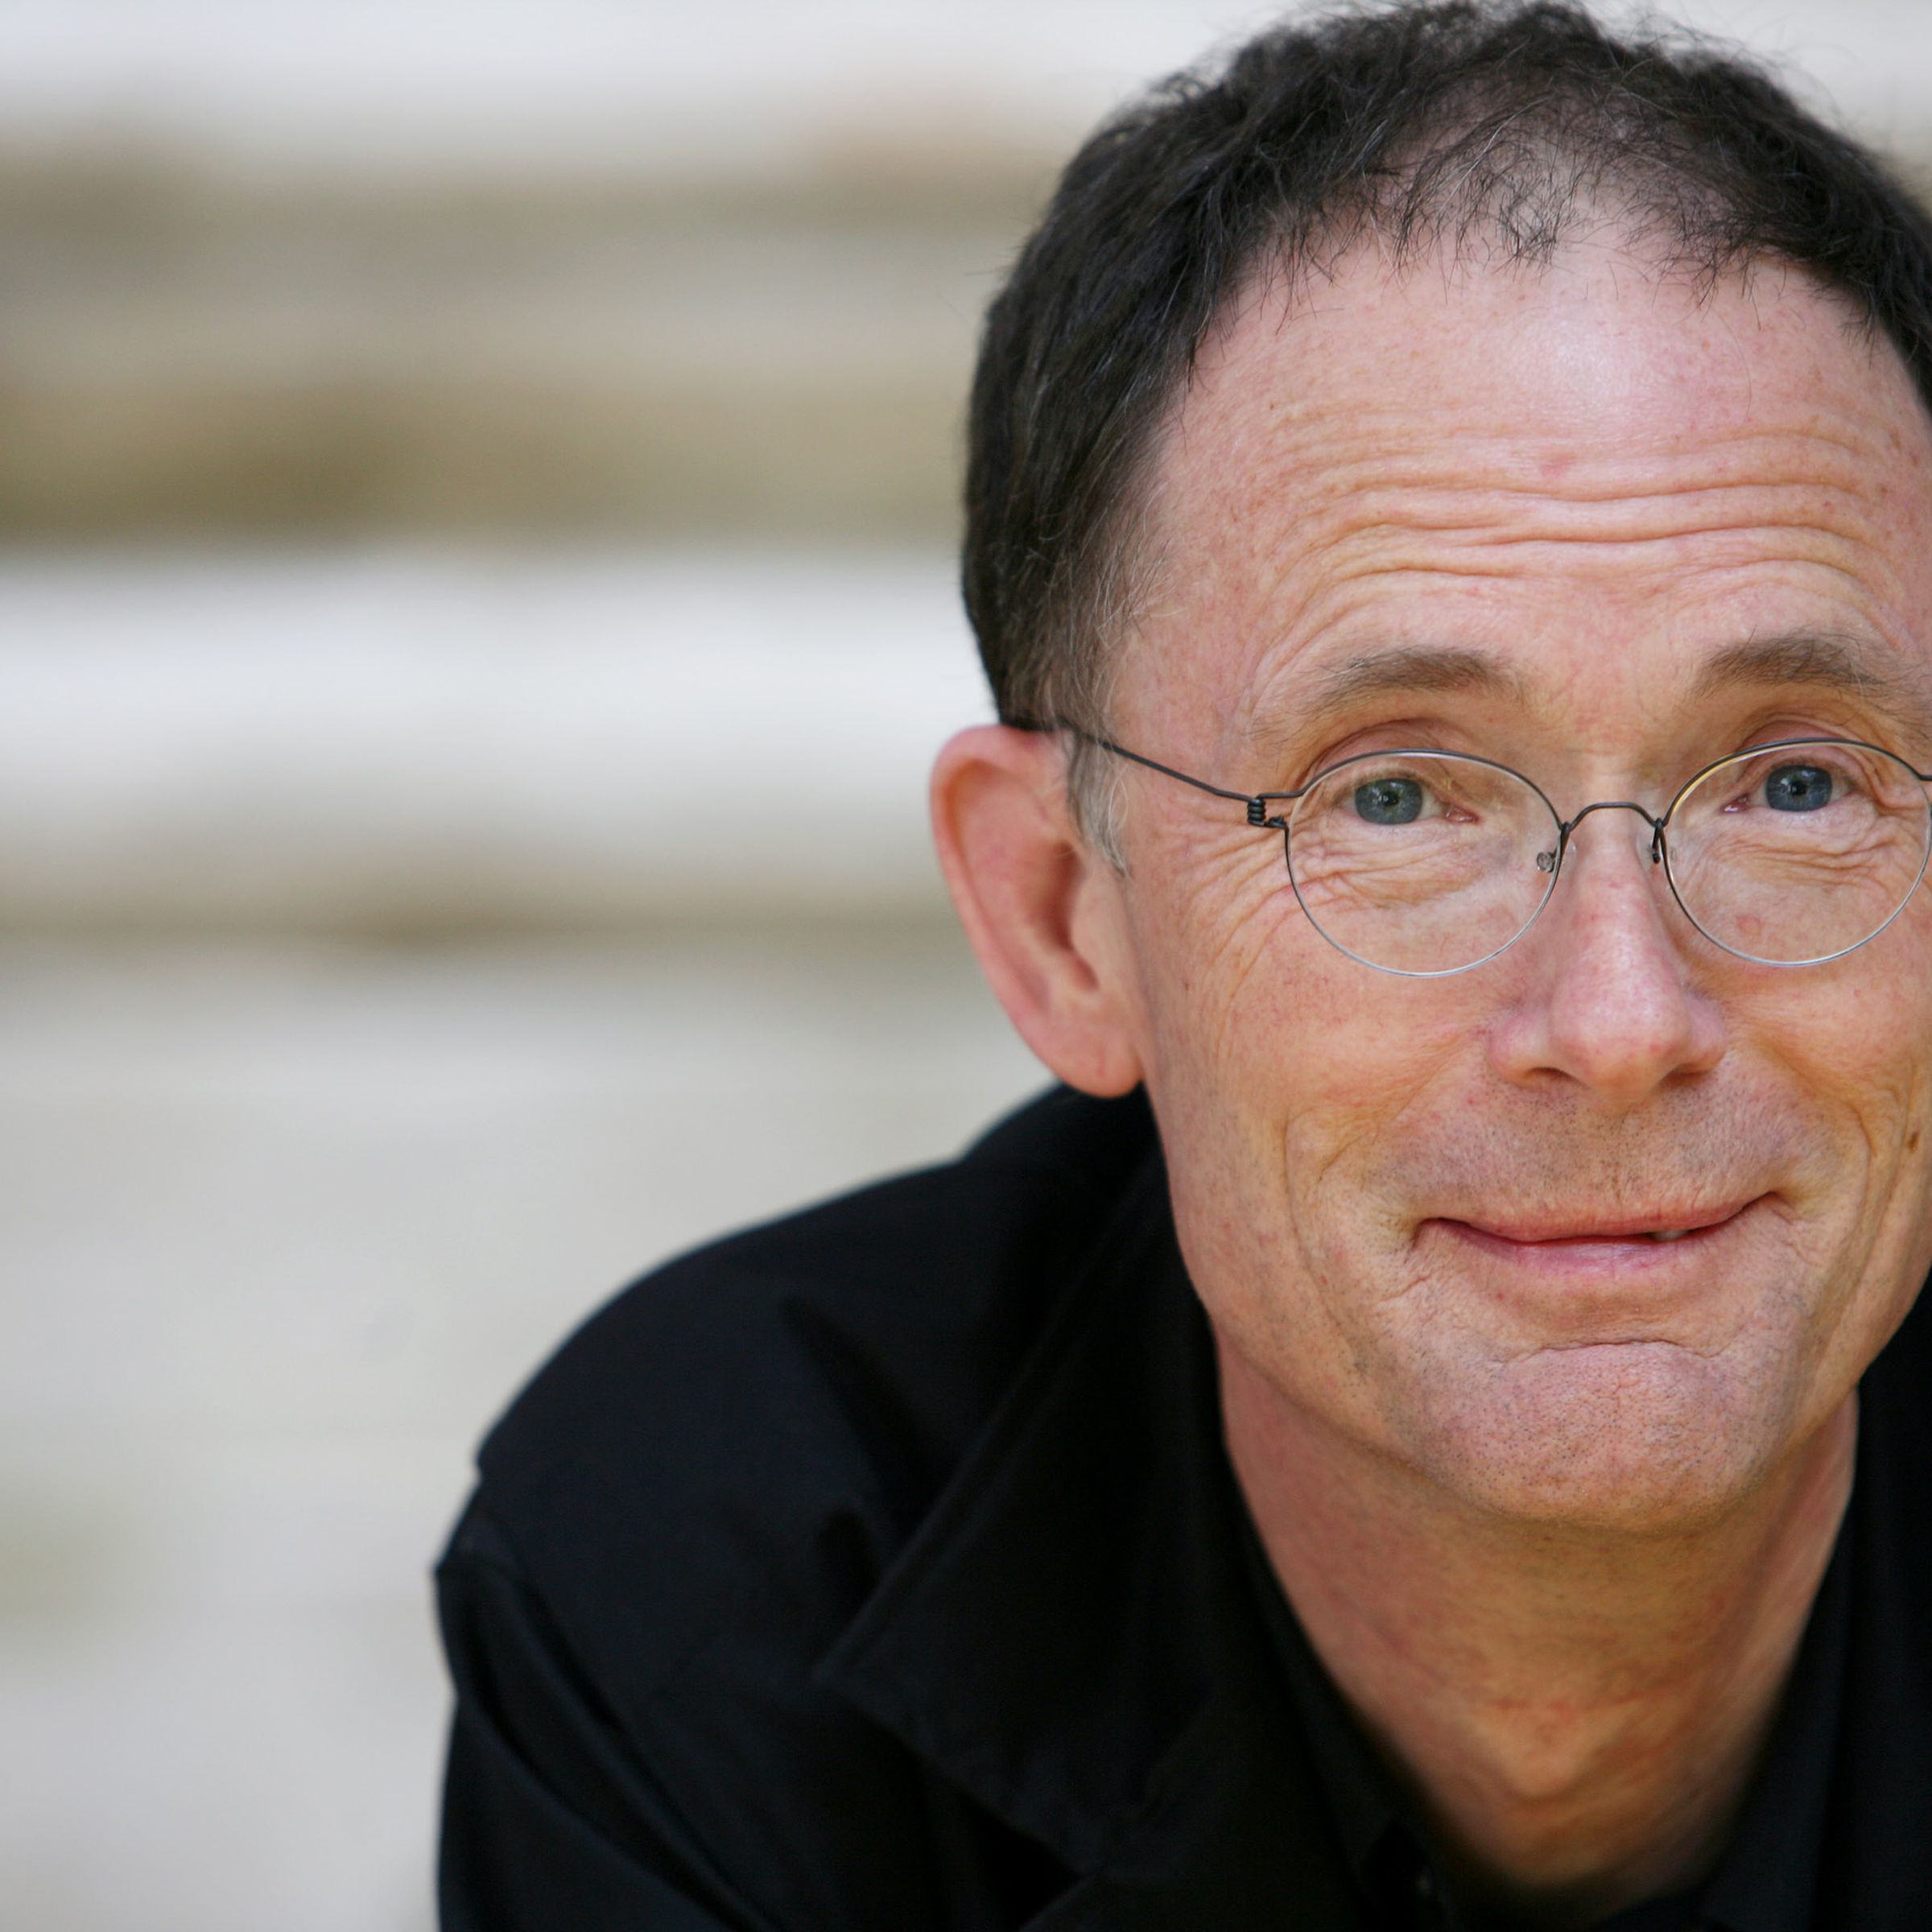 U.S. Author William Gibson attends the 7th editition of the Festival of Literature at Literature House on May 26, 2007 in Rome, Italy.